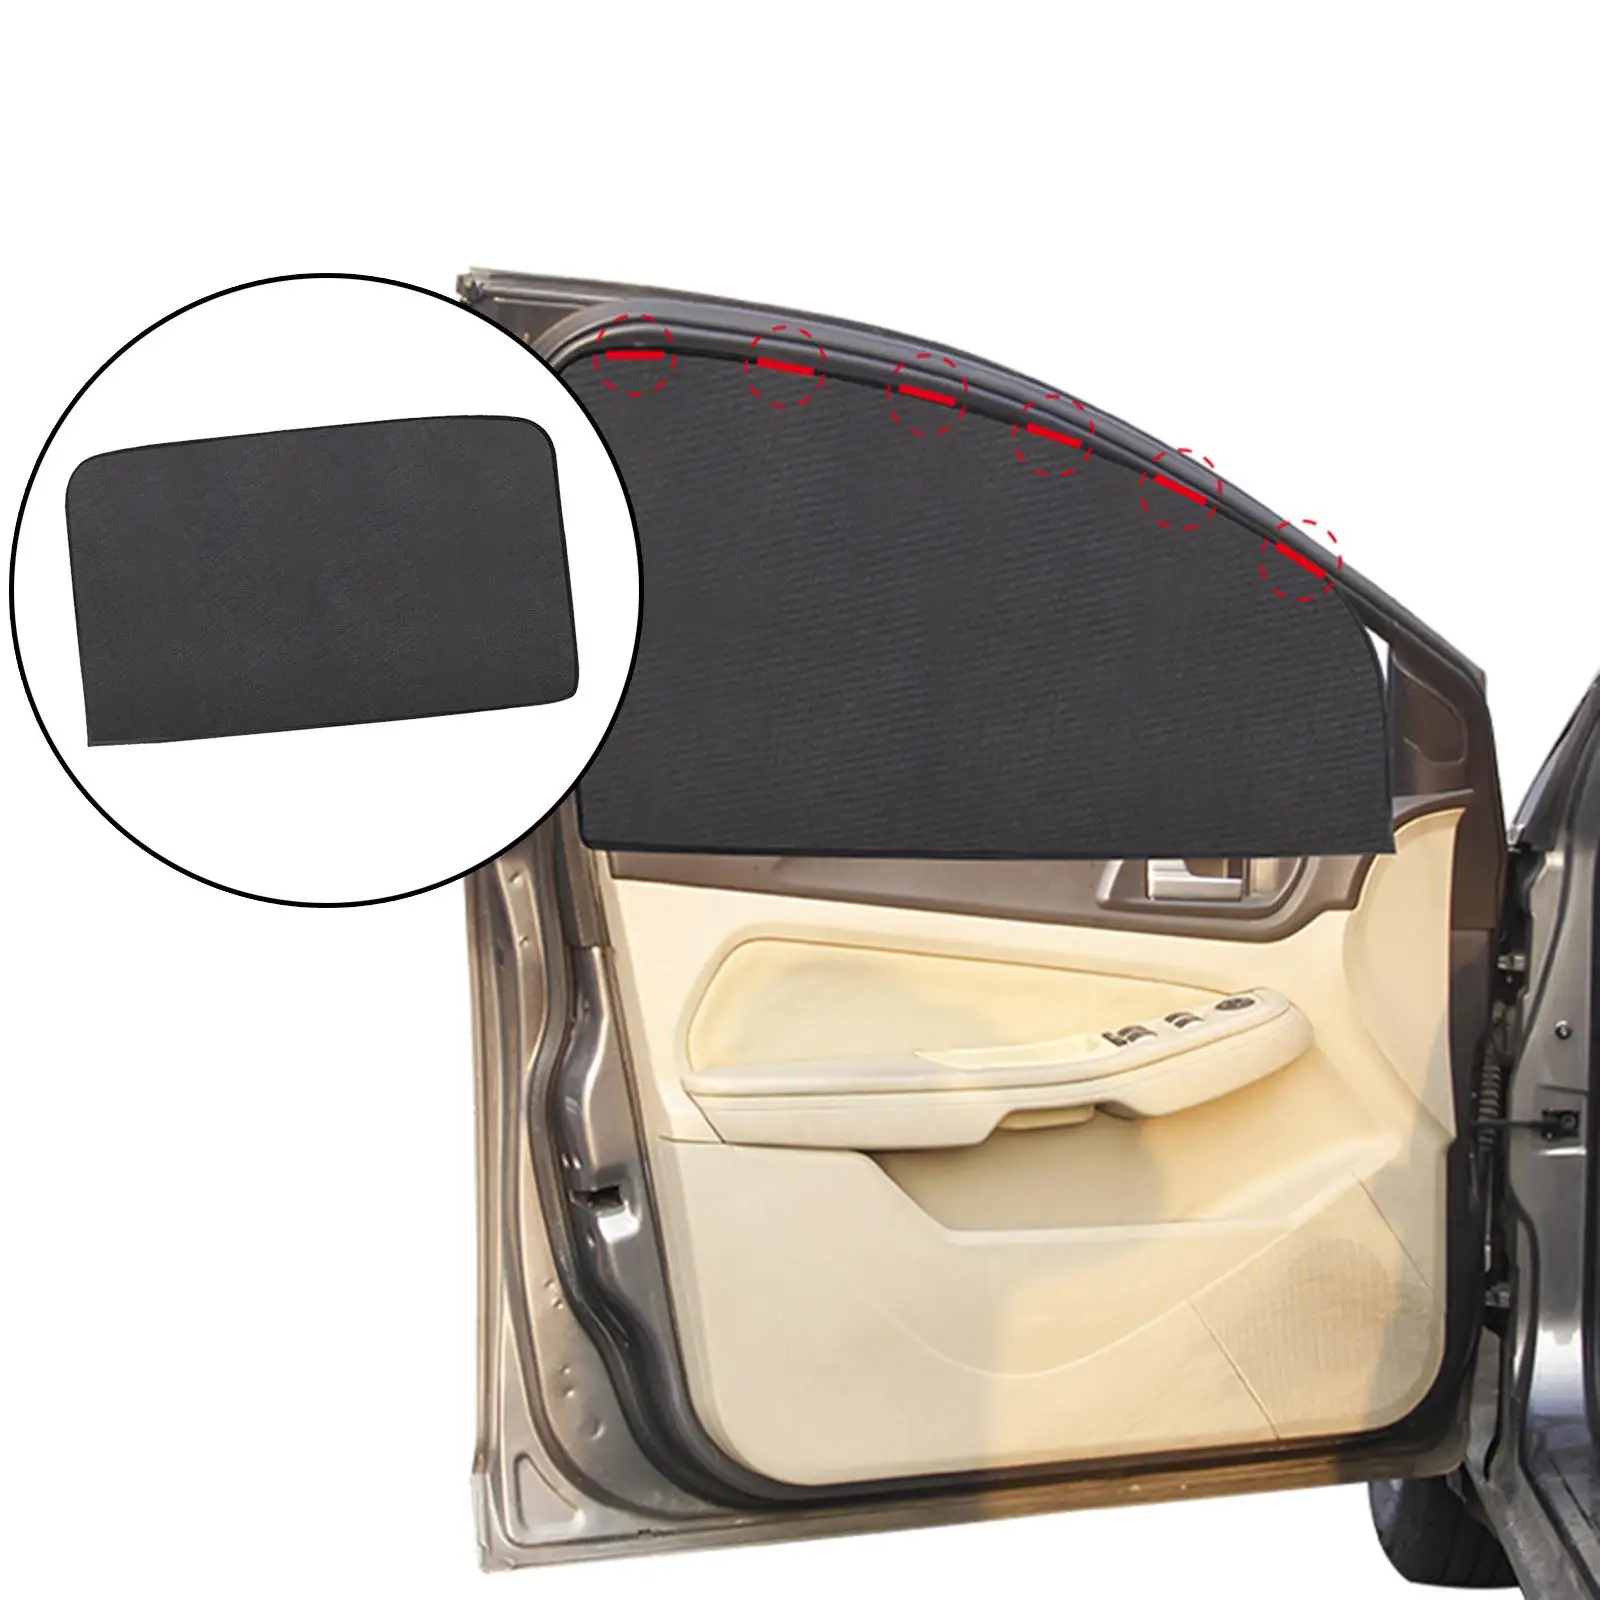   Privacy Car Magnetic Rear Front Side Window Sun Shade Shade Set Durable Einfach zu installieren Spare Parts Professional